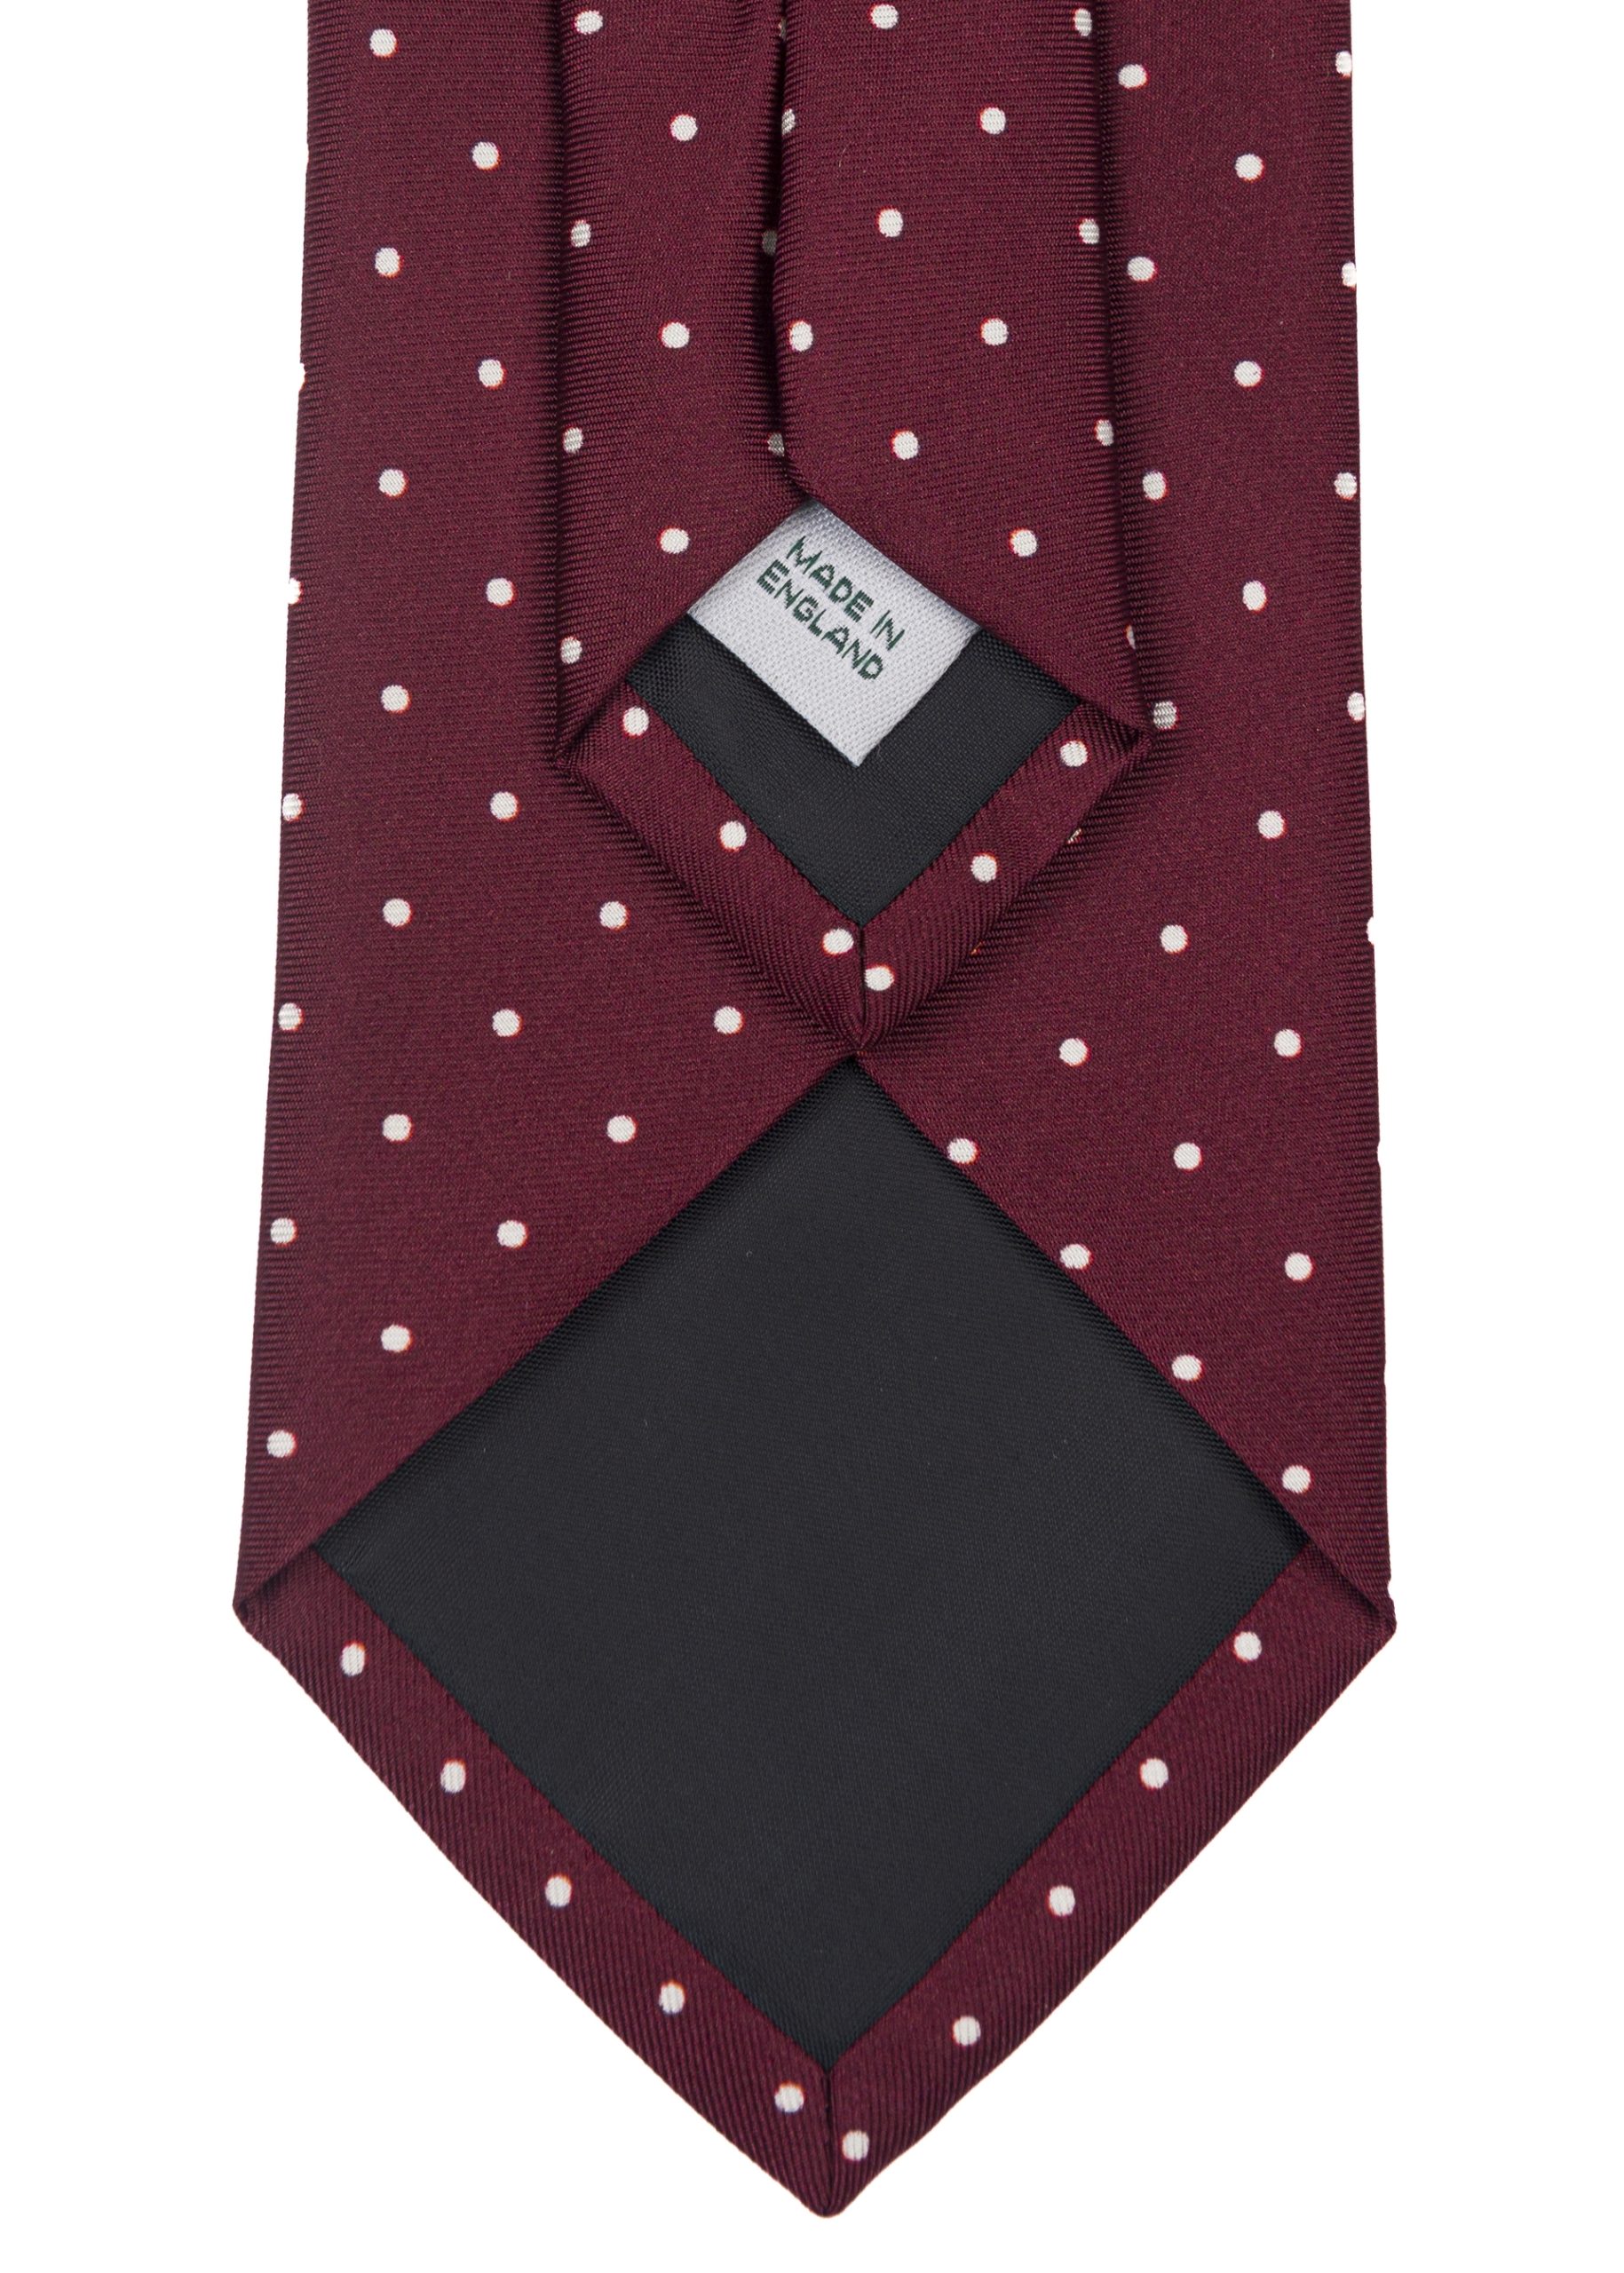 Roderick Charles spotty tie in white and wine